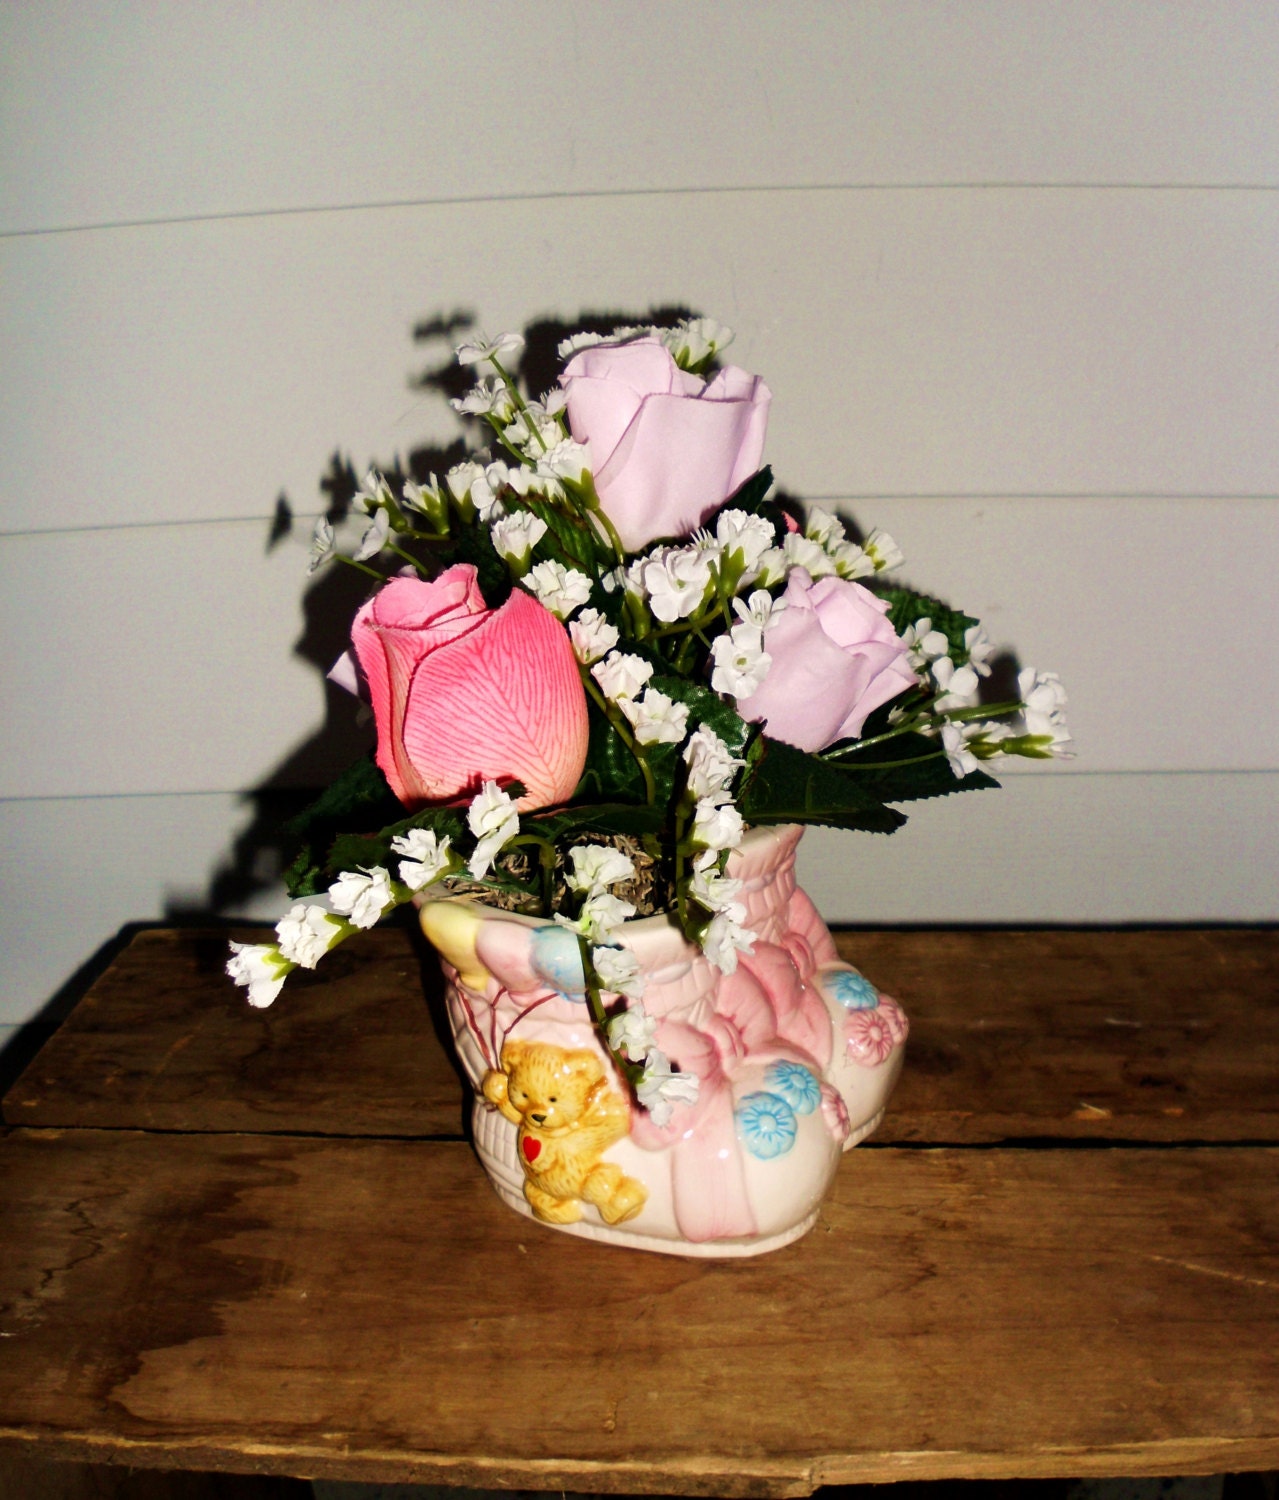 Small Baby Girl Floral Arrangement in by TandJscountrycrafts